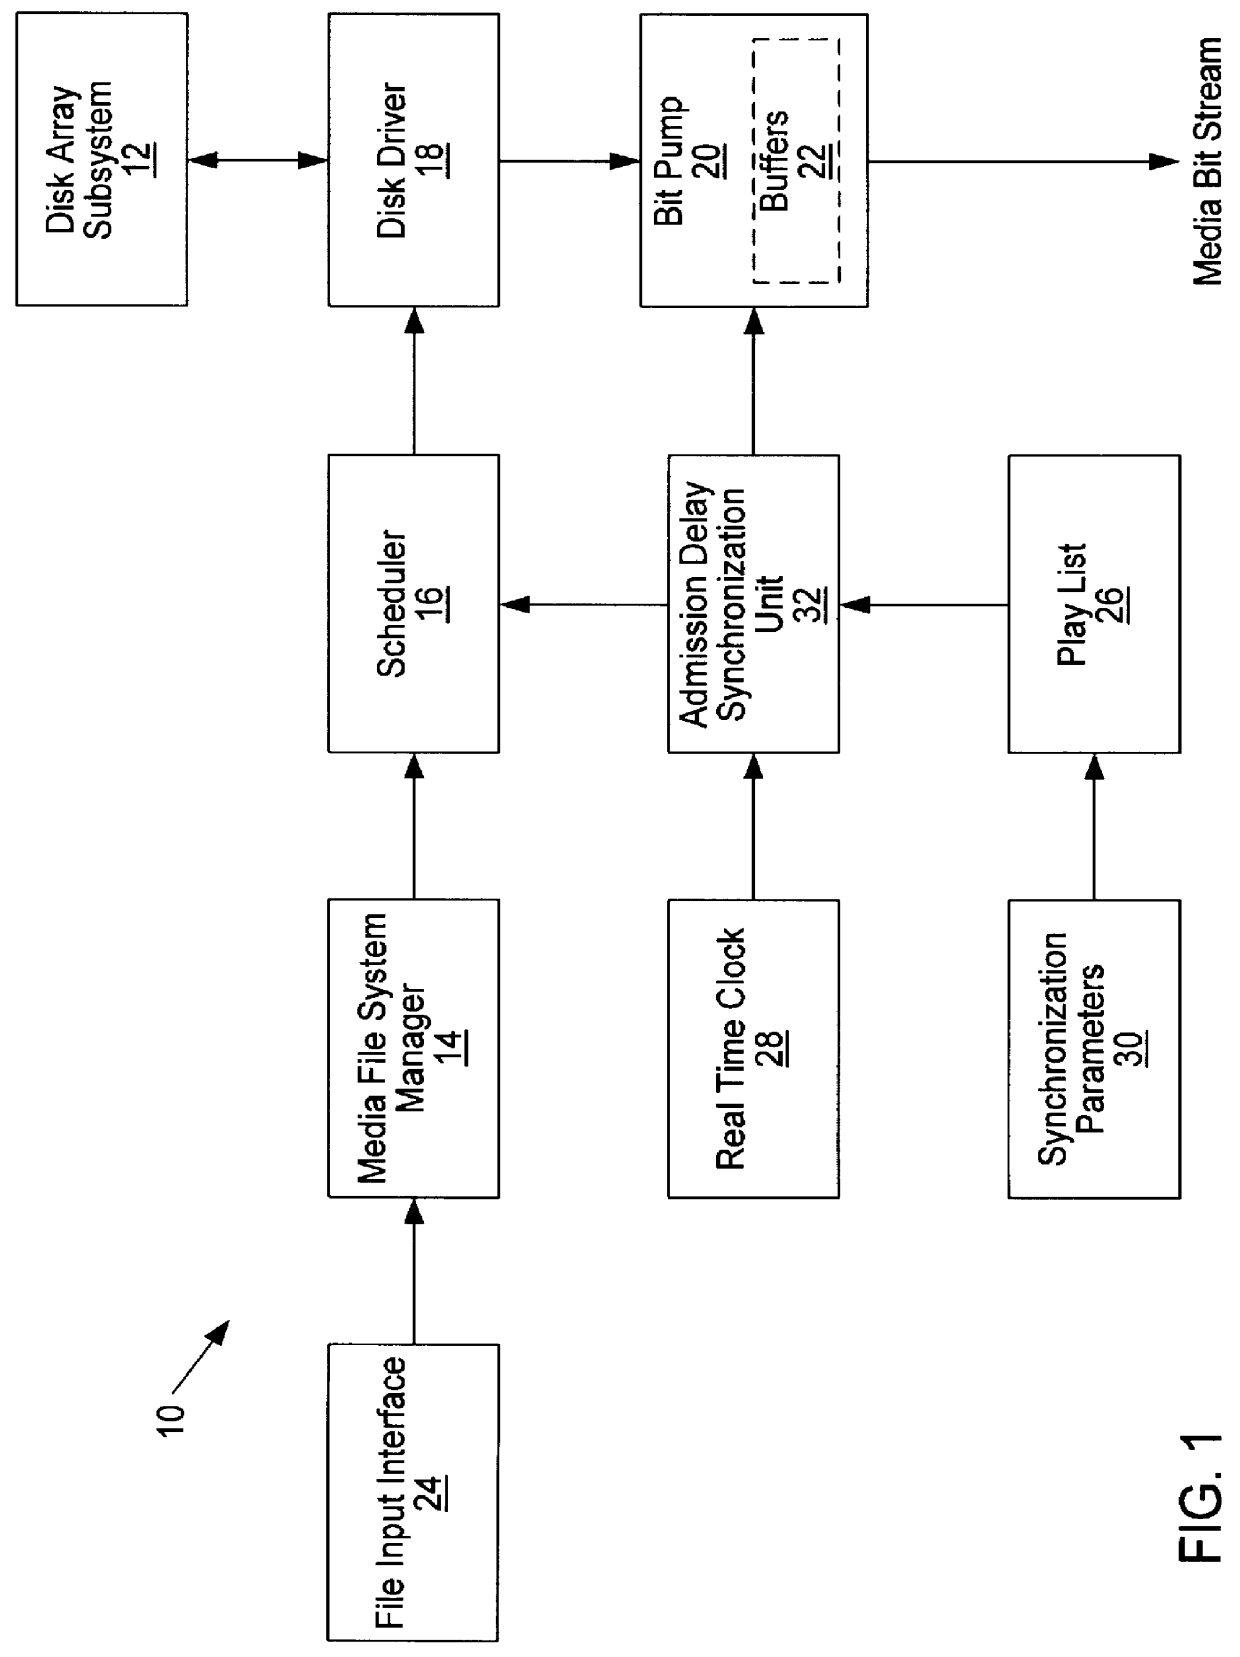 System and method for synchronizing presentation of media stream playlists with real time